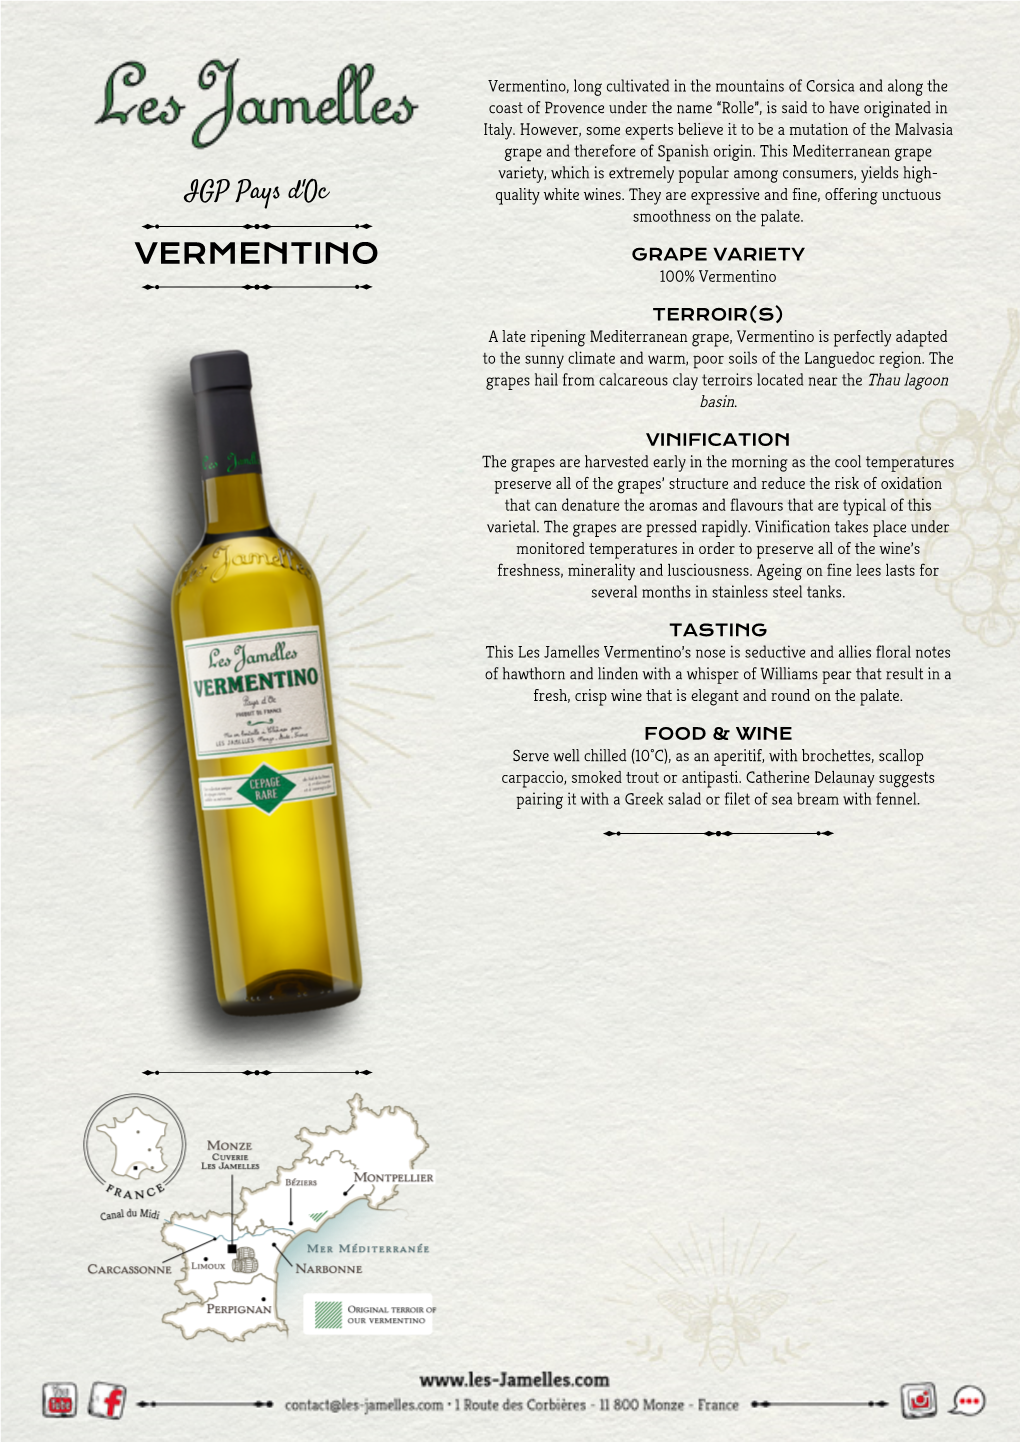 Vermentino, Long Cultivated in the Mountains of Corsica and Along the Coast of Provence Under the Name “Rolle”, Is Said to Have Originated in Italy